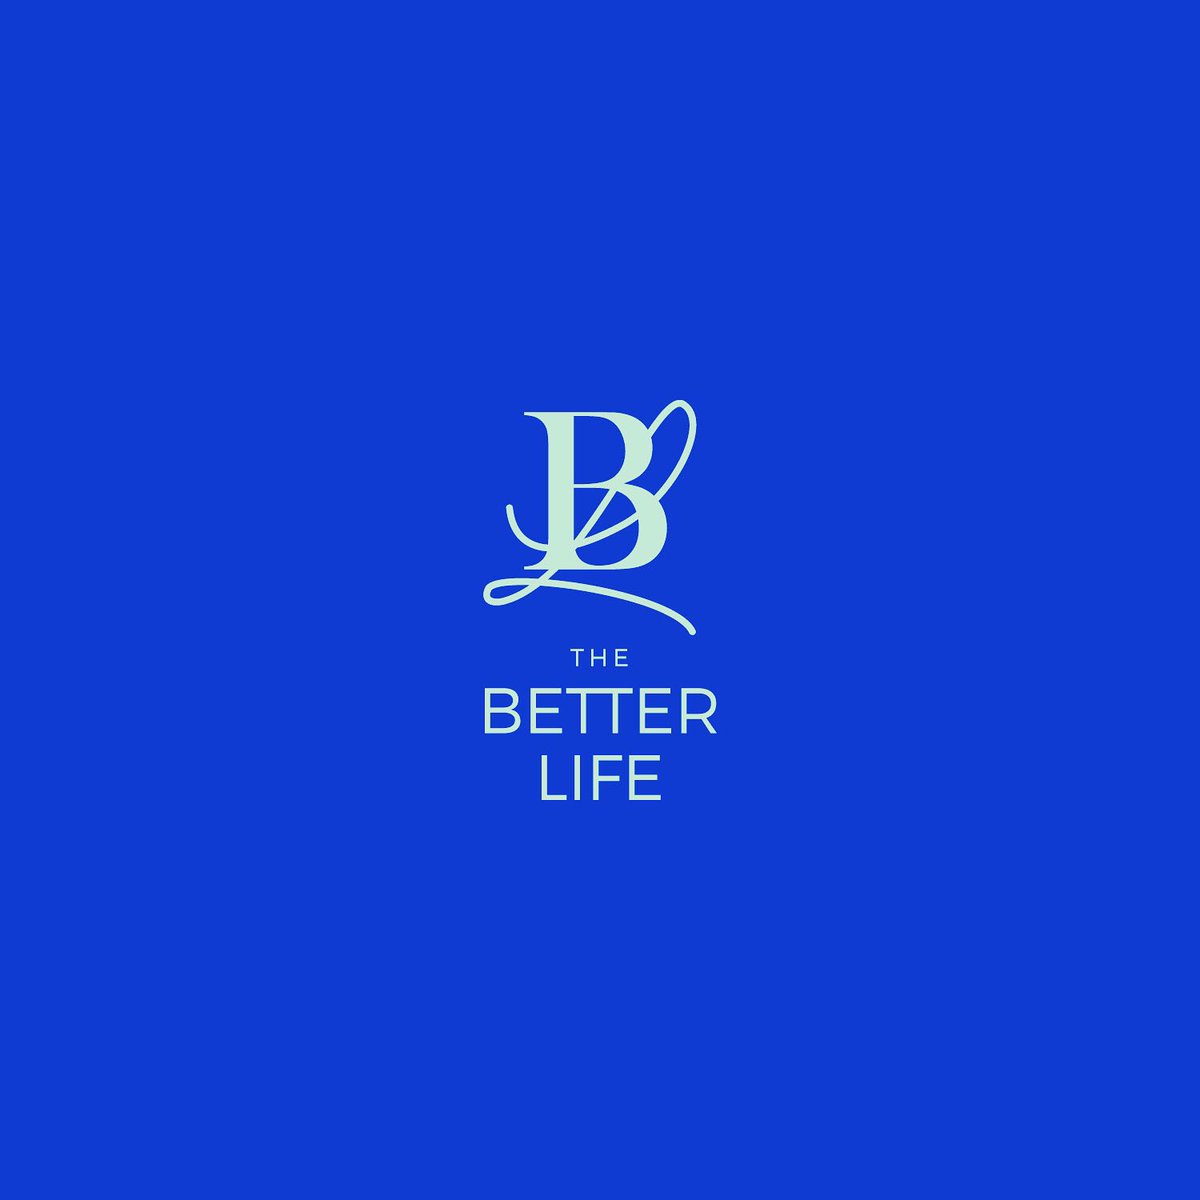 New episode out today!! #BetterConditions
#TheBetterLife